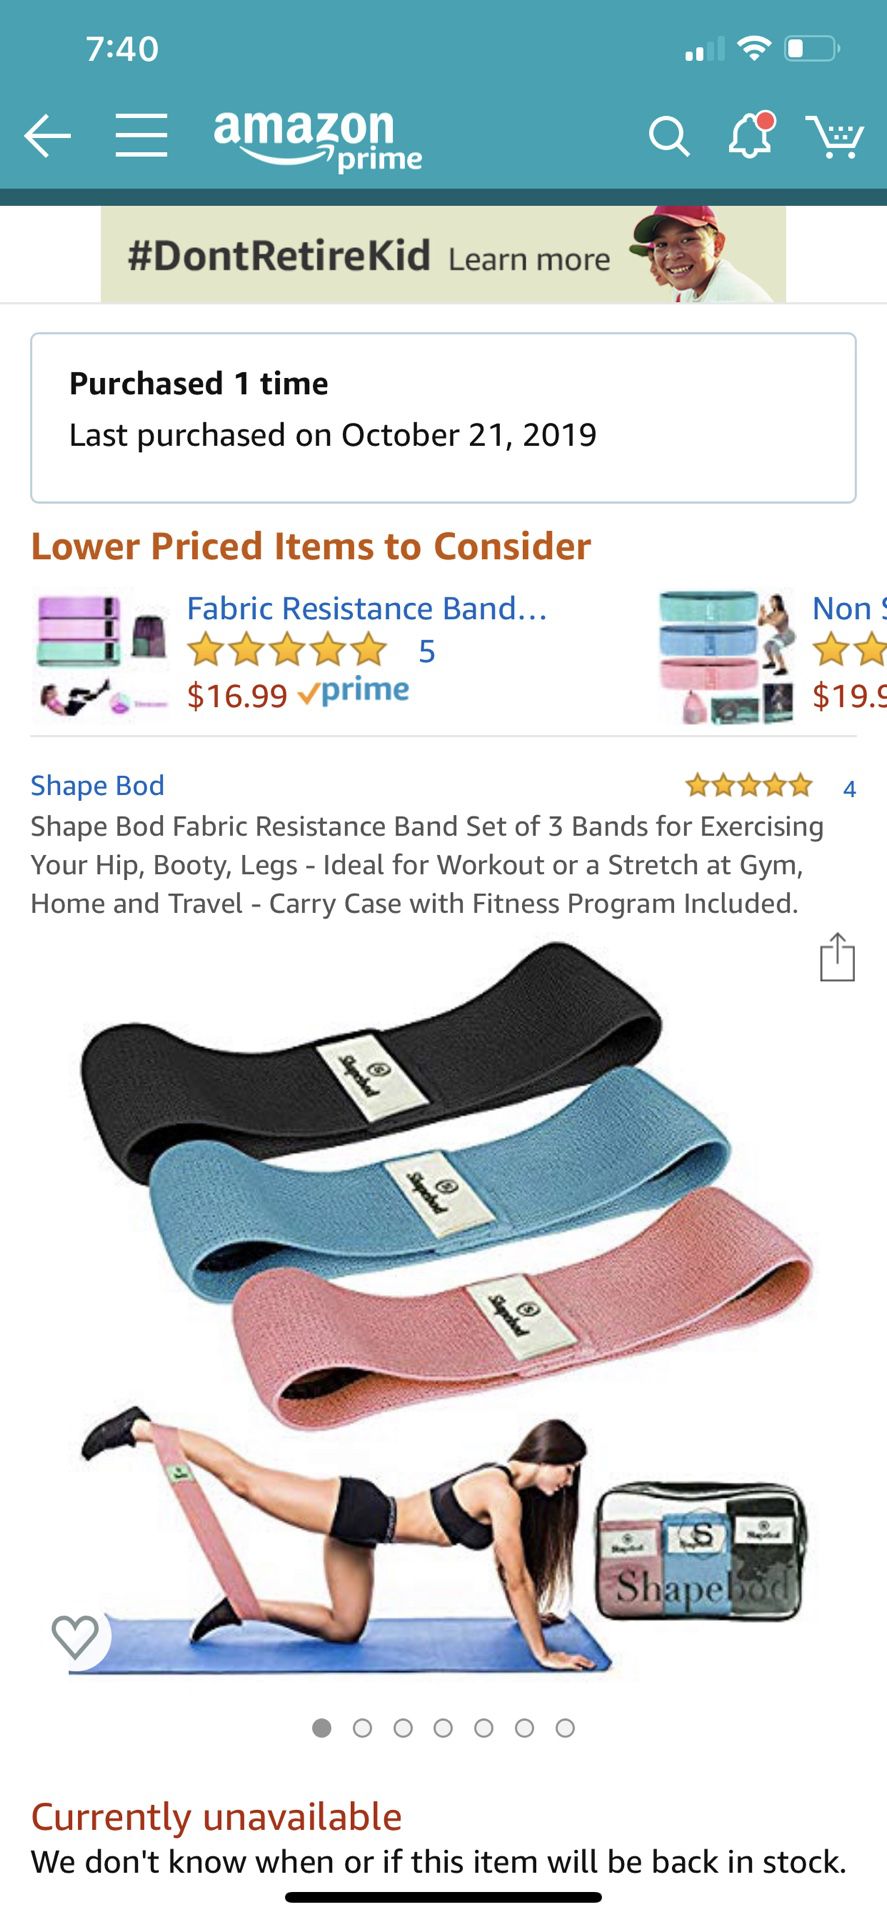 Shape Bod Fabric Resistance Band Set of 3 Bands for Exercising Your Hip, Booty, Legs - Ideal for Workout or a Stretch at Gym, Home and Travel - Carry